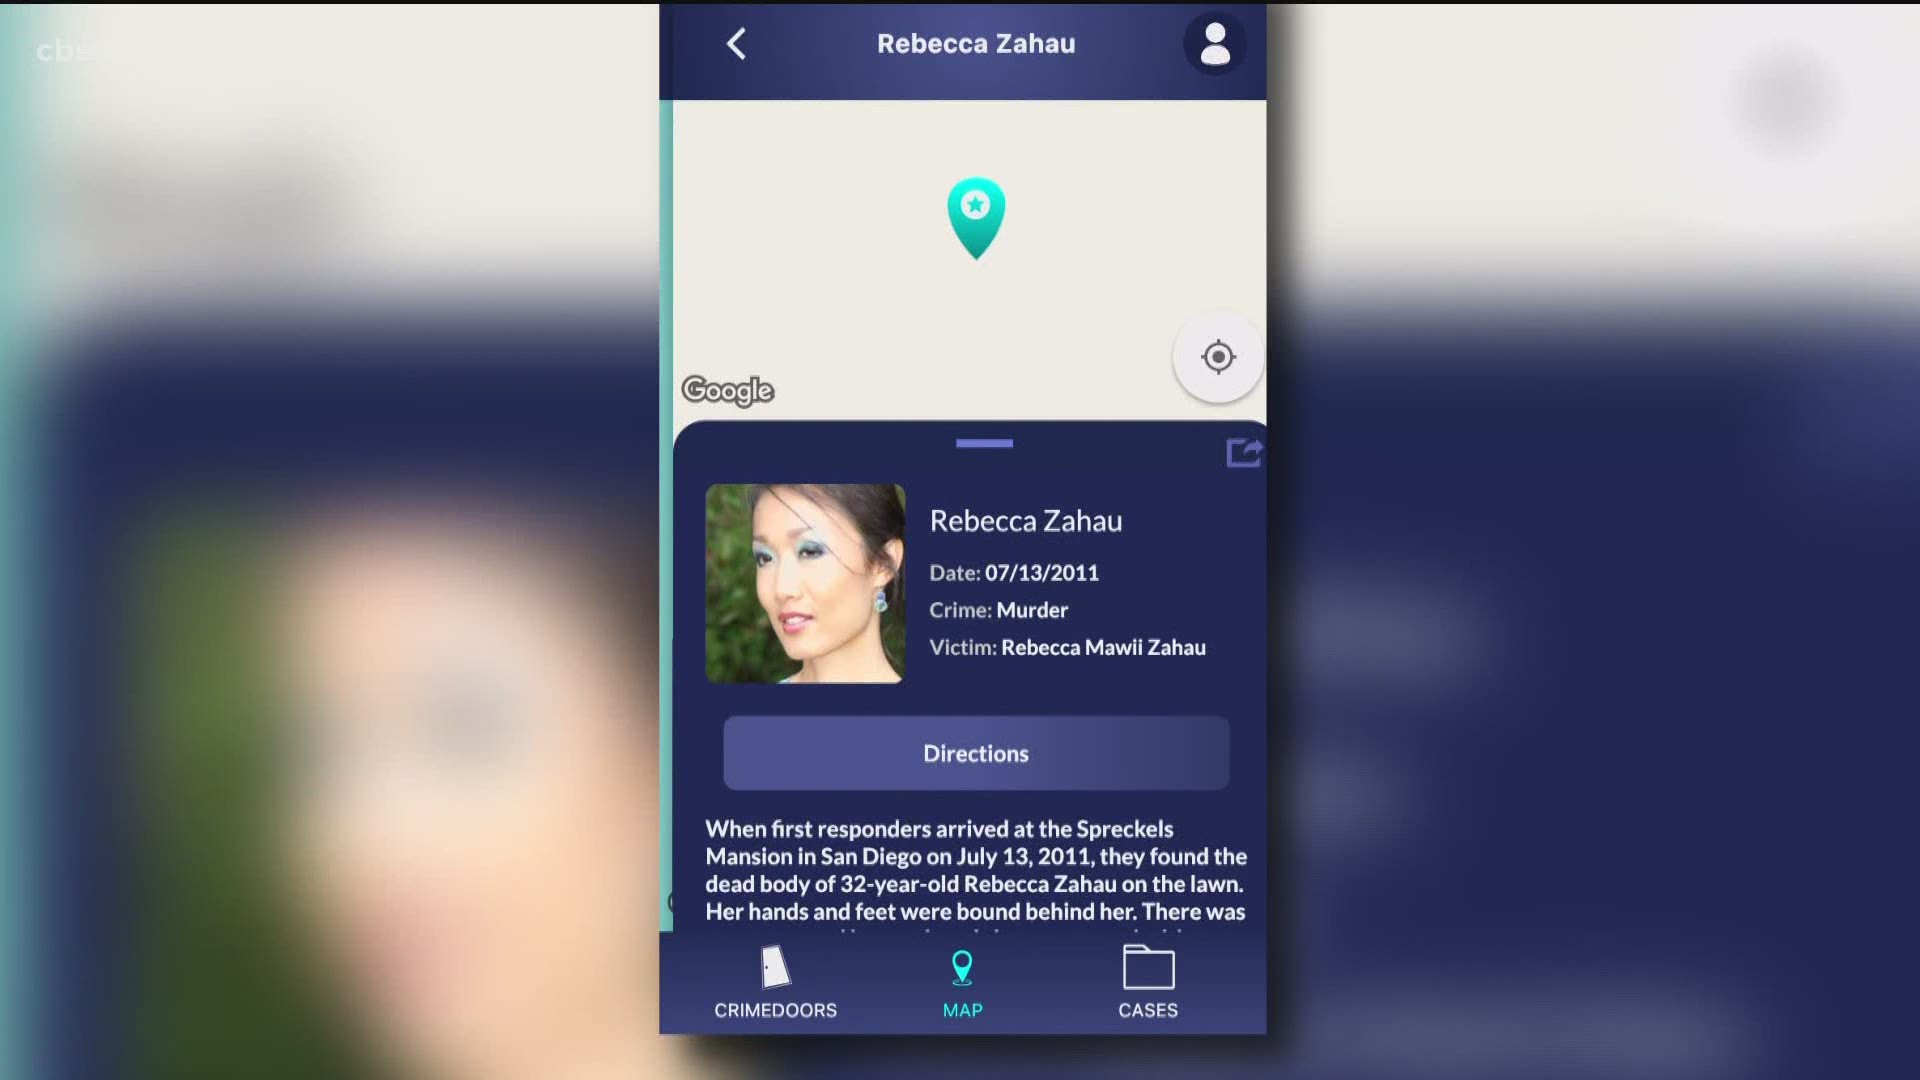 The CrimeDoor app offers two 3D scenes of the Spreckels mansion where Zahau was found hanging from a balcony.